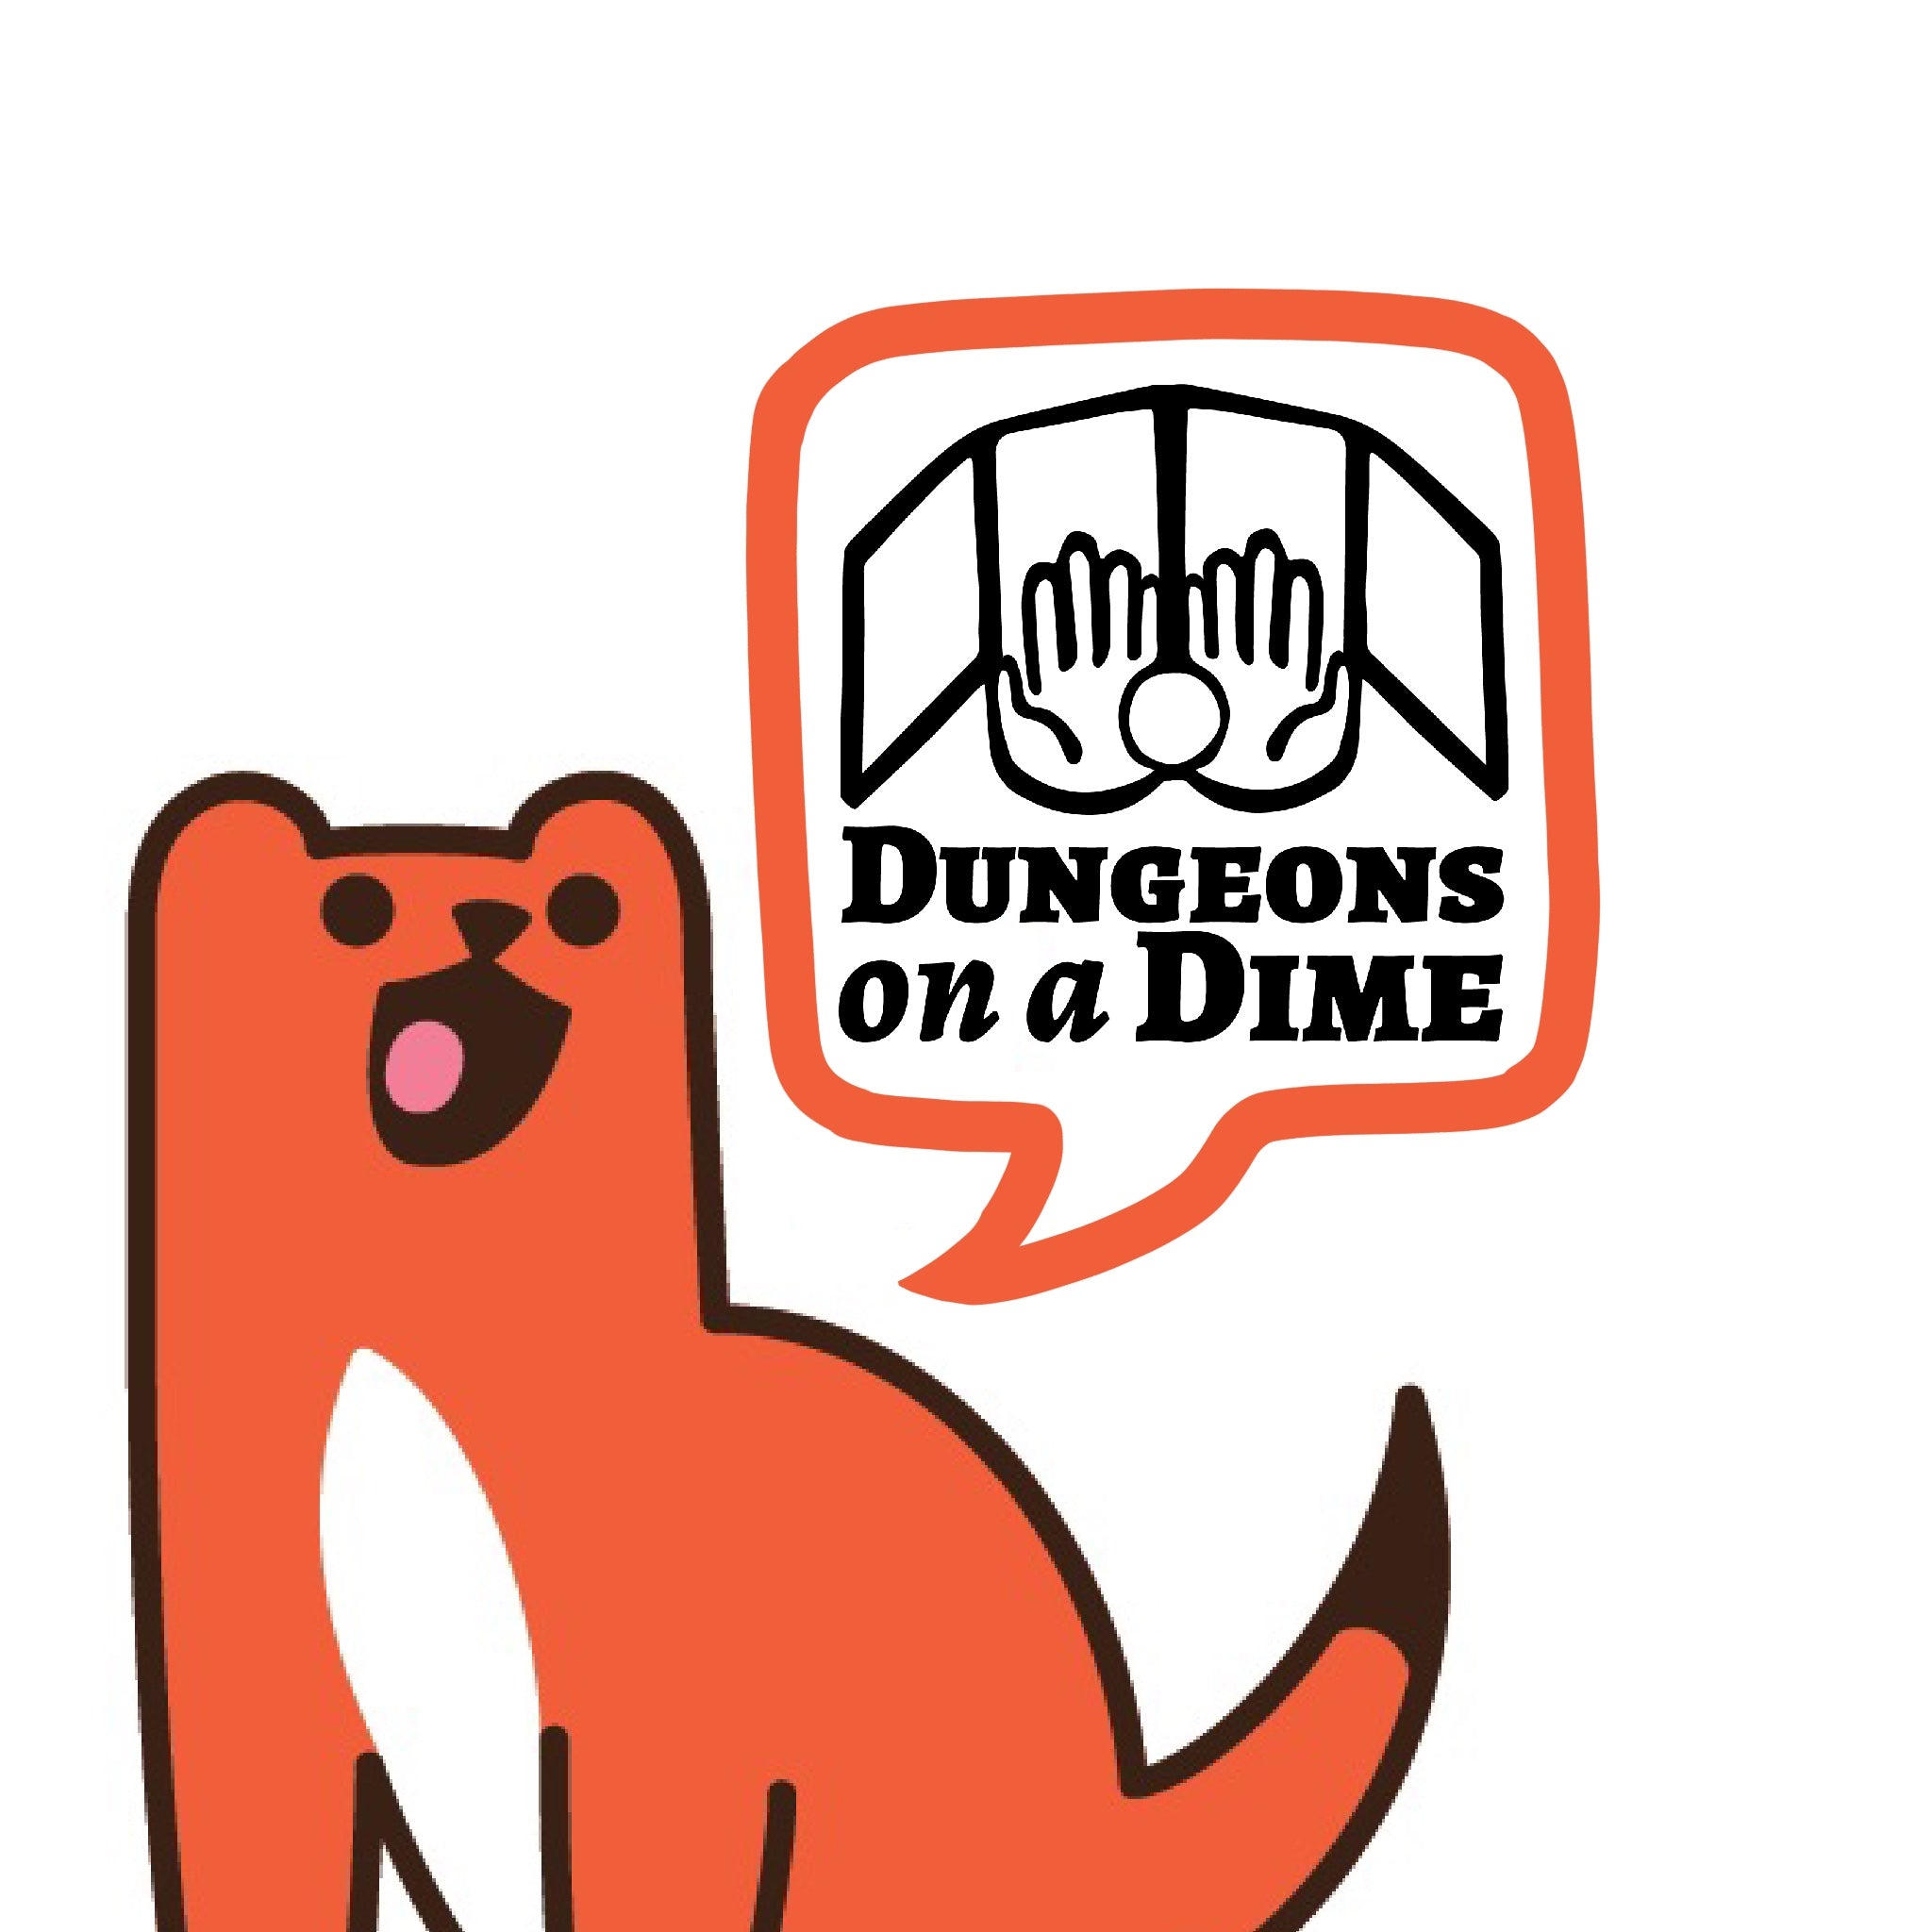 Image. A combination of the Stout Stoat Press and Dungeons on a Dime logos.